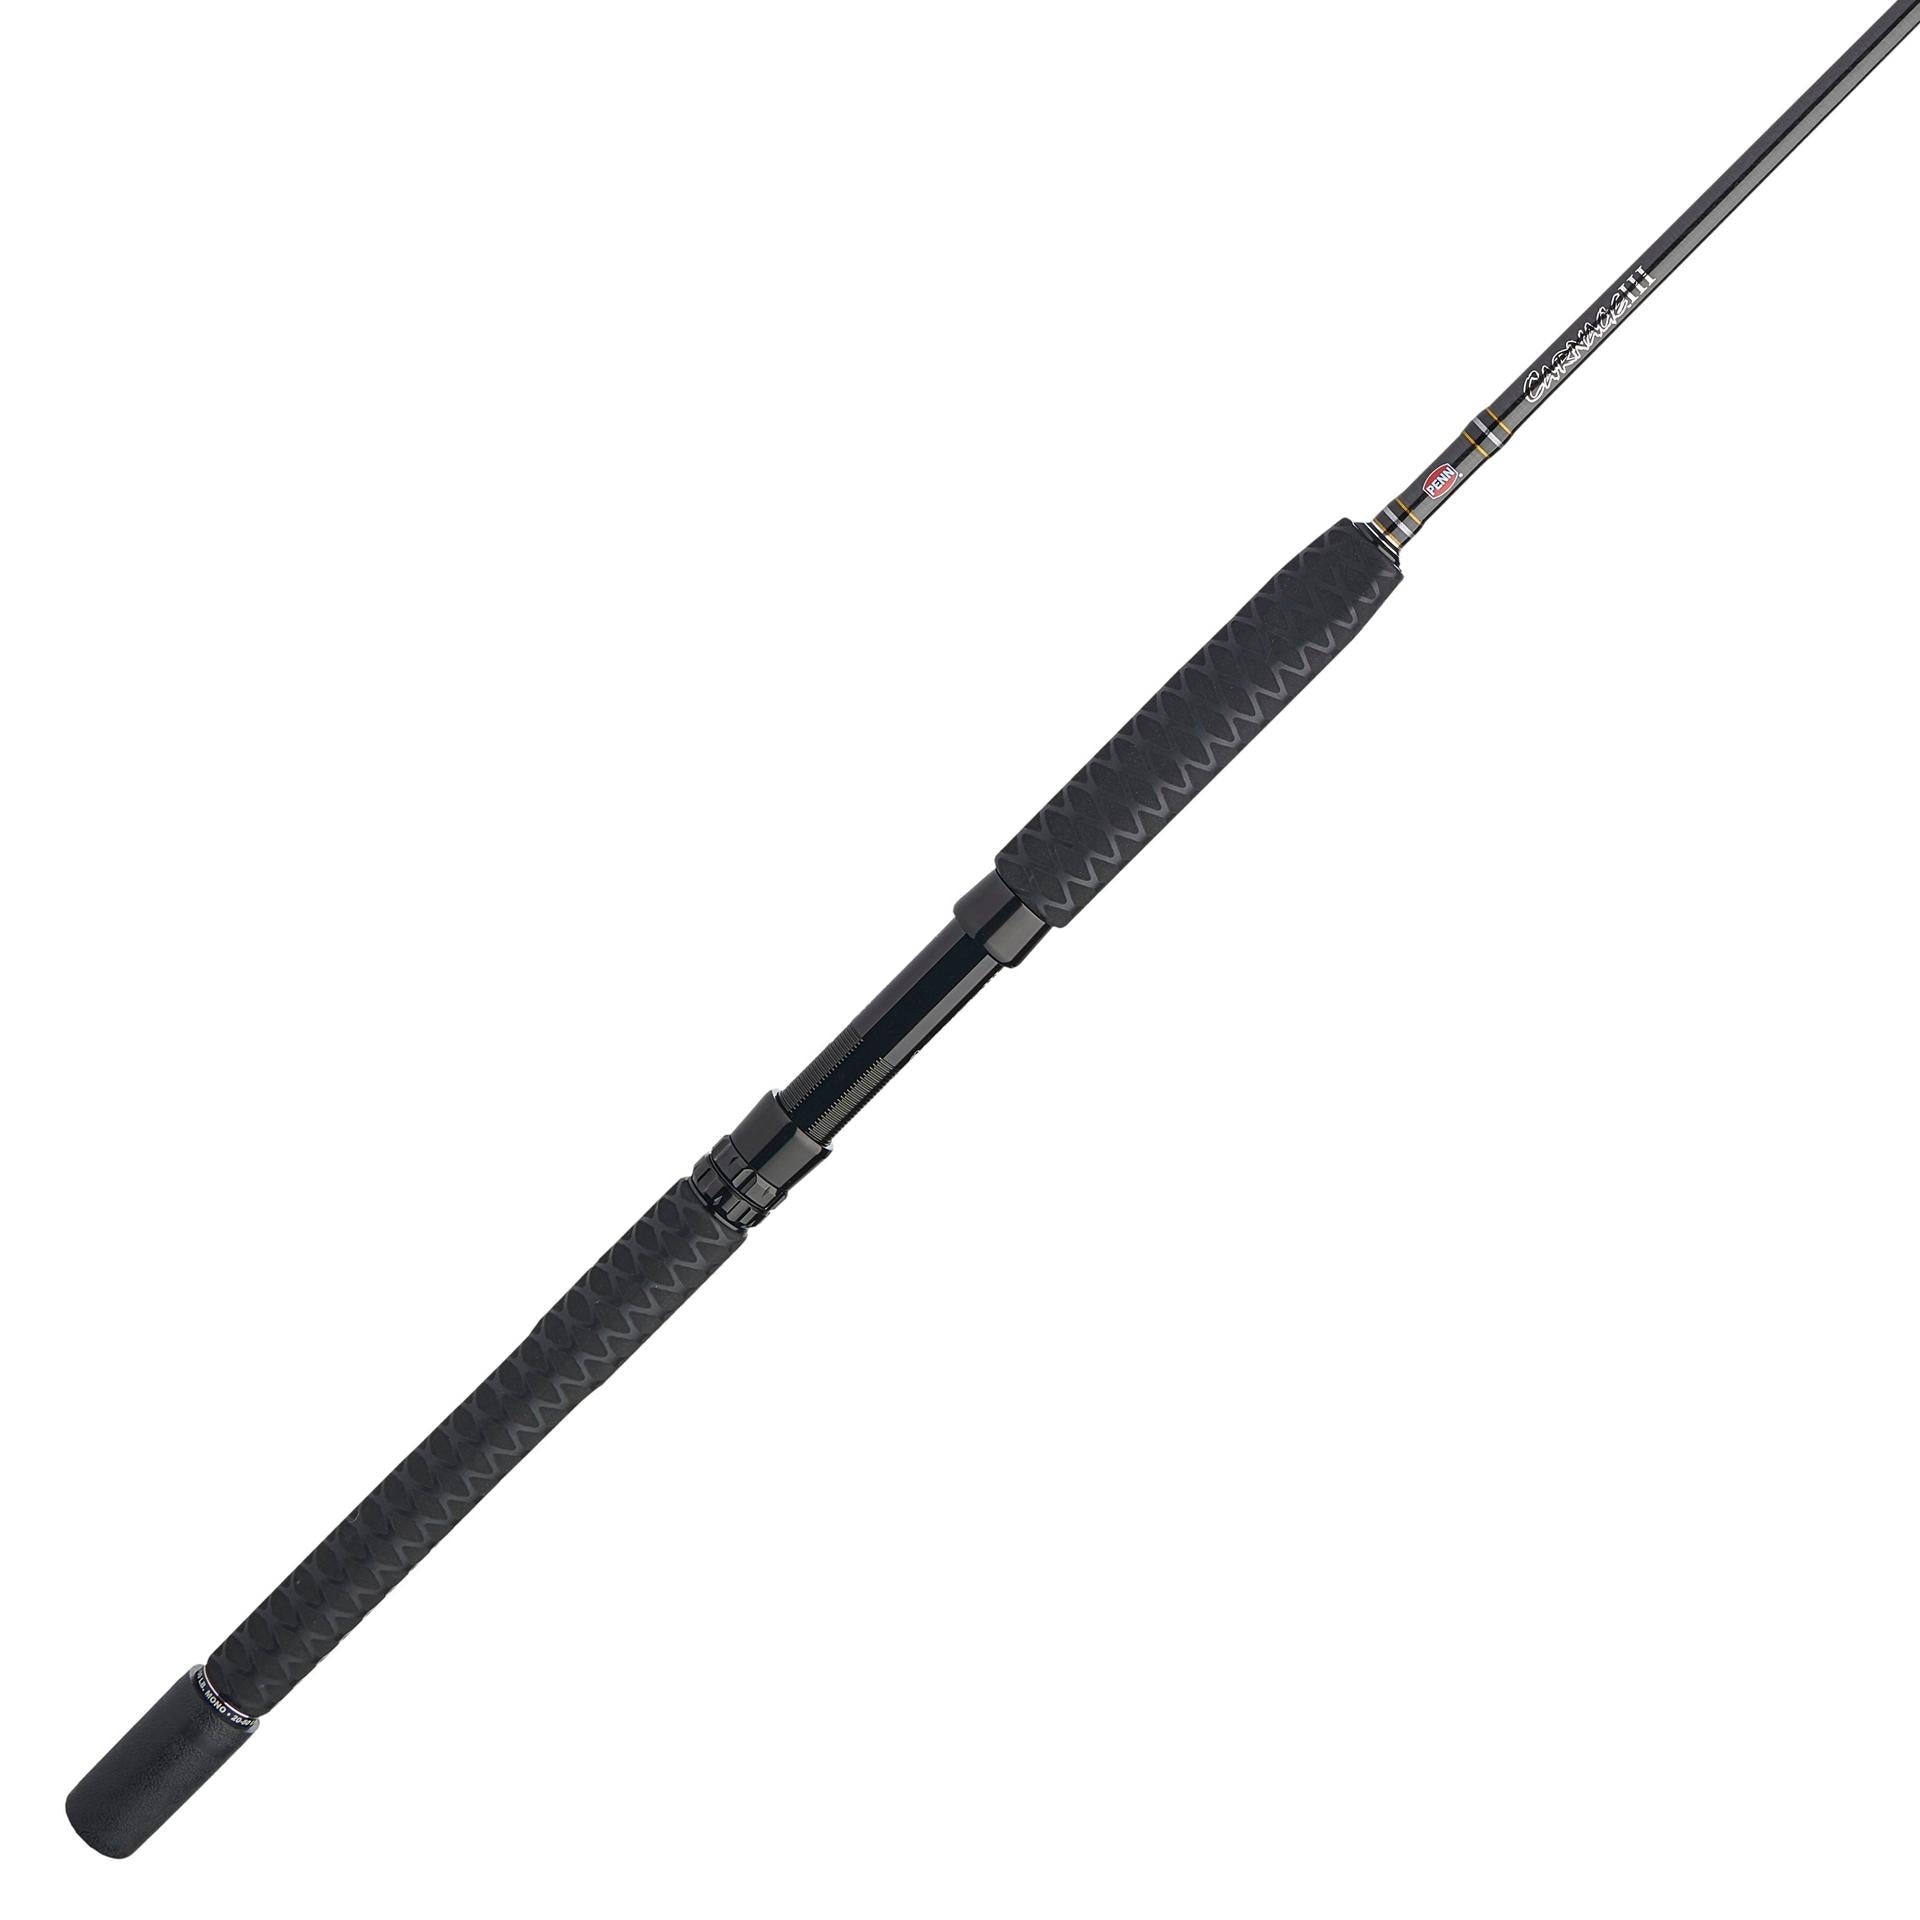 Penn Carnage III Offshore Roller Tip Conventional Rod - CAROSIII80130C411RT  - 4'11 - 80-130 lb.